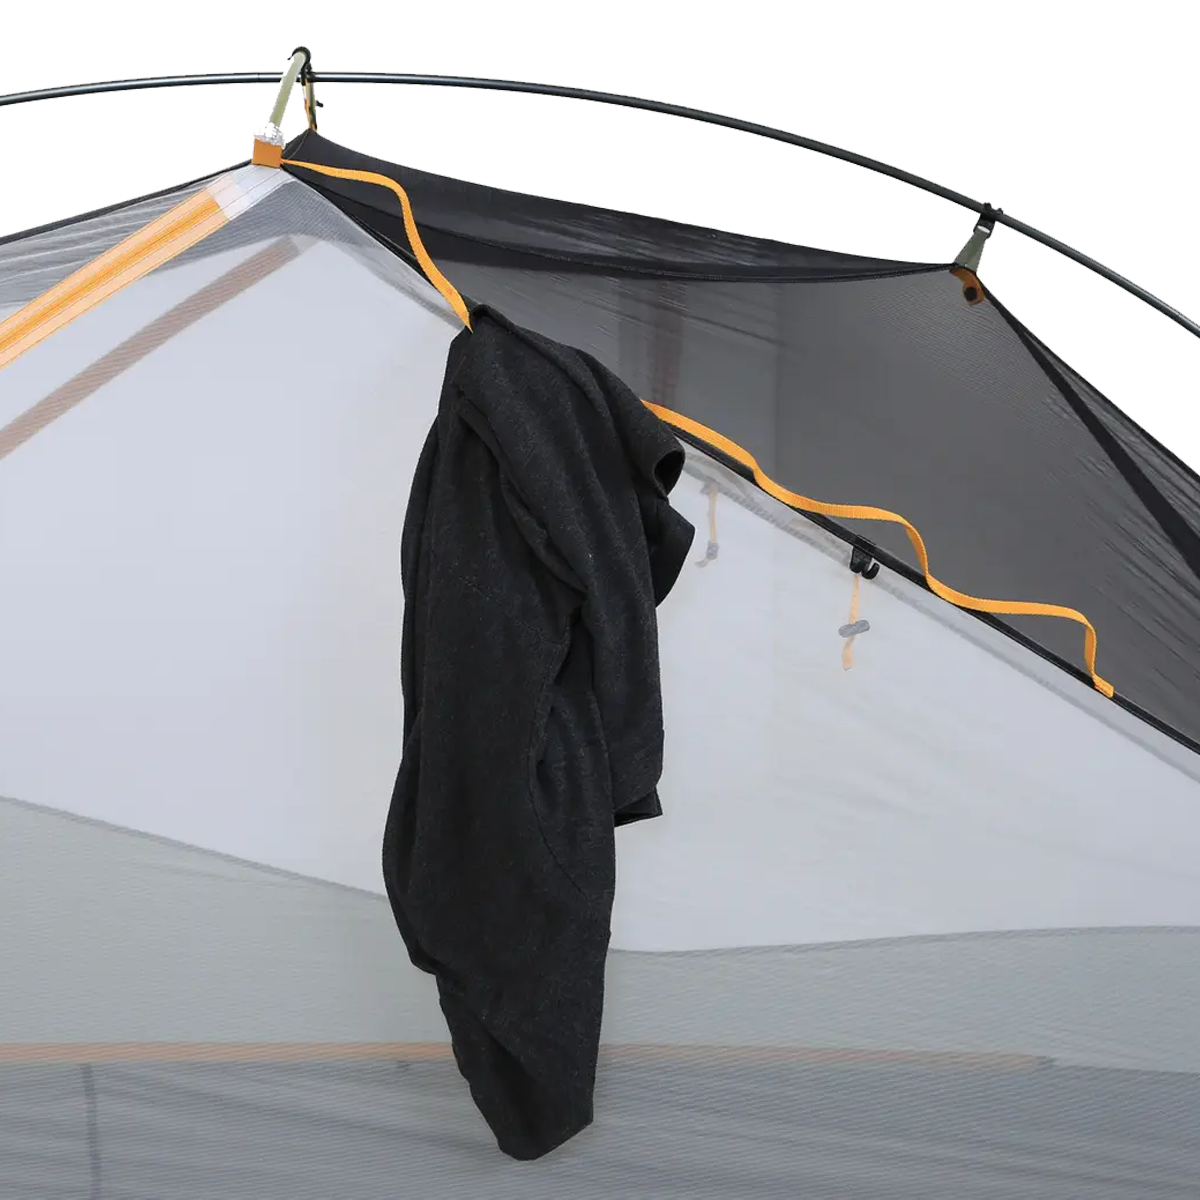 Dragonfly OSMO Bikepack 2 Person Tent alternate view